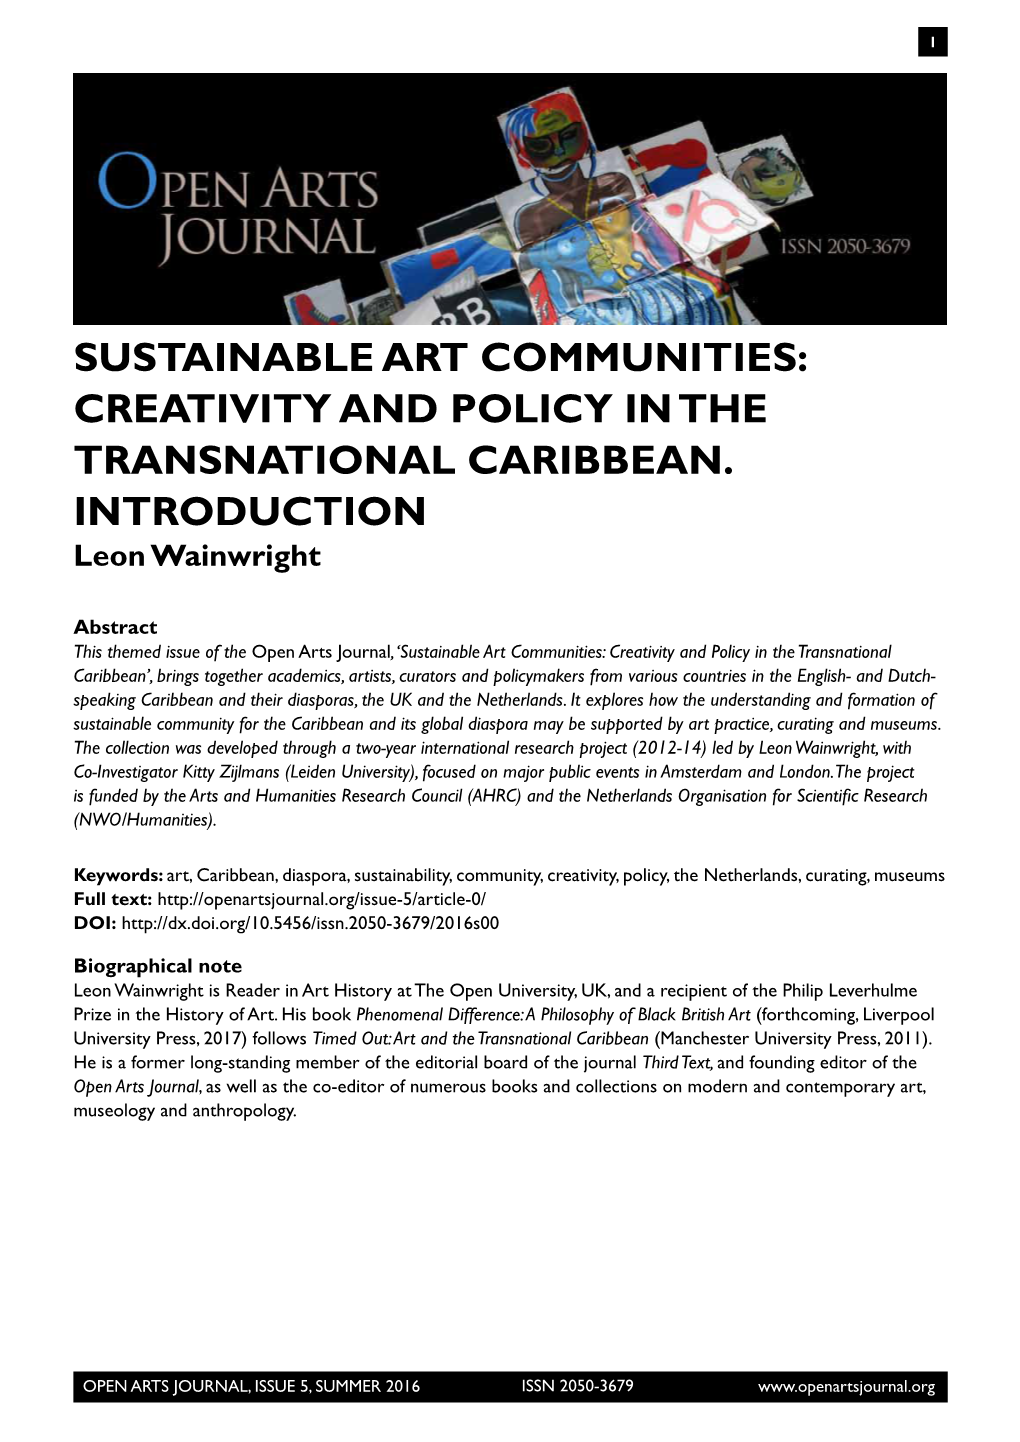 Sustainable Art Communities: Creativity and Policy in the Transnational Caribbean